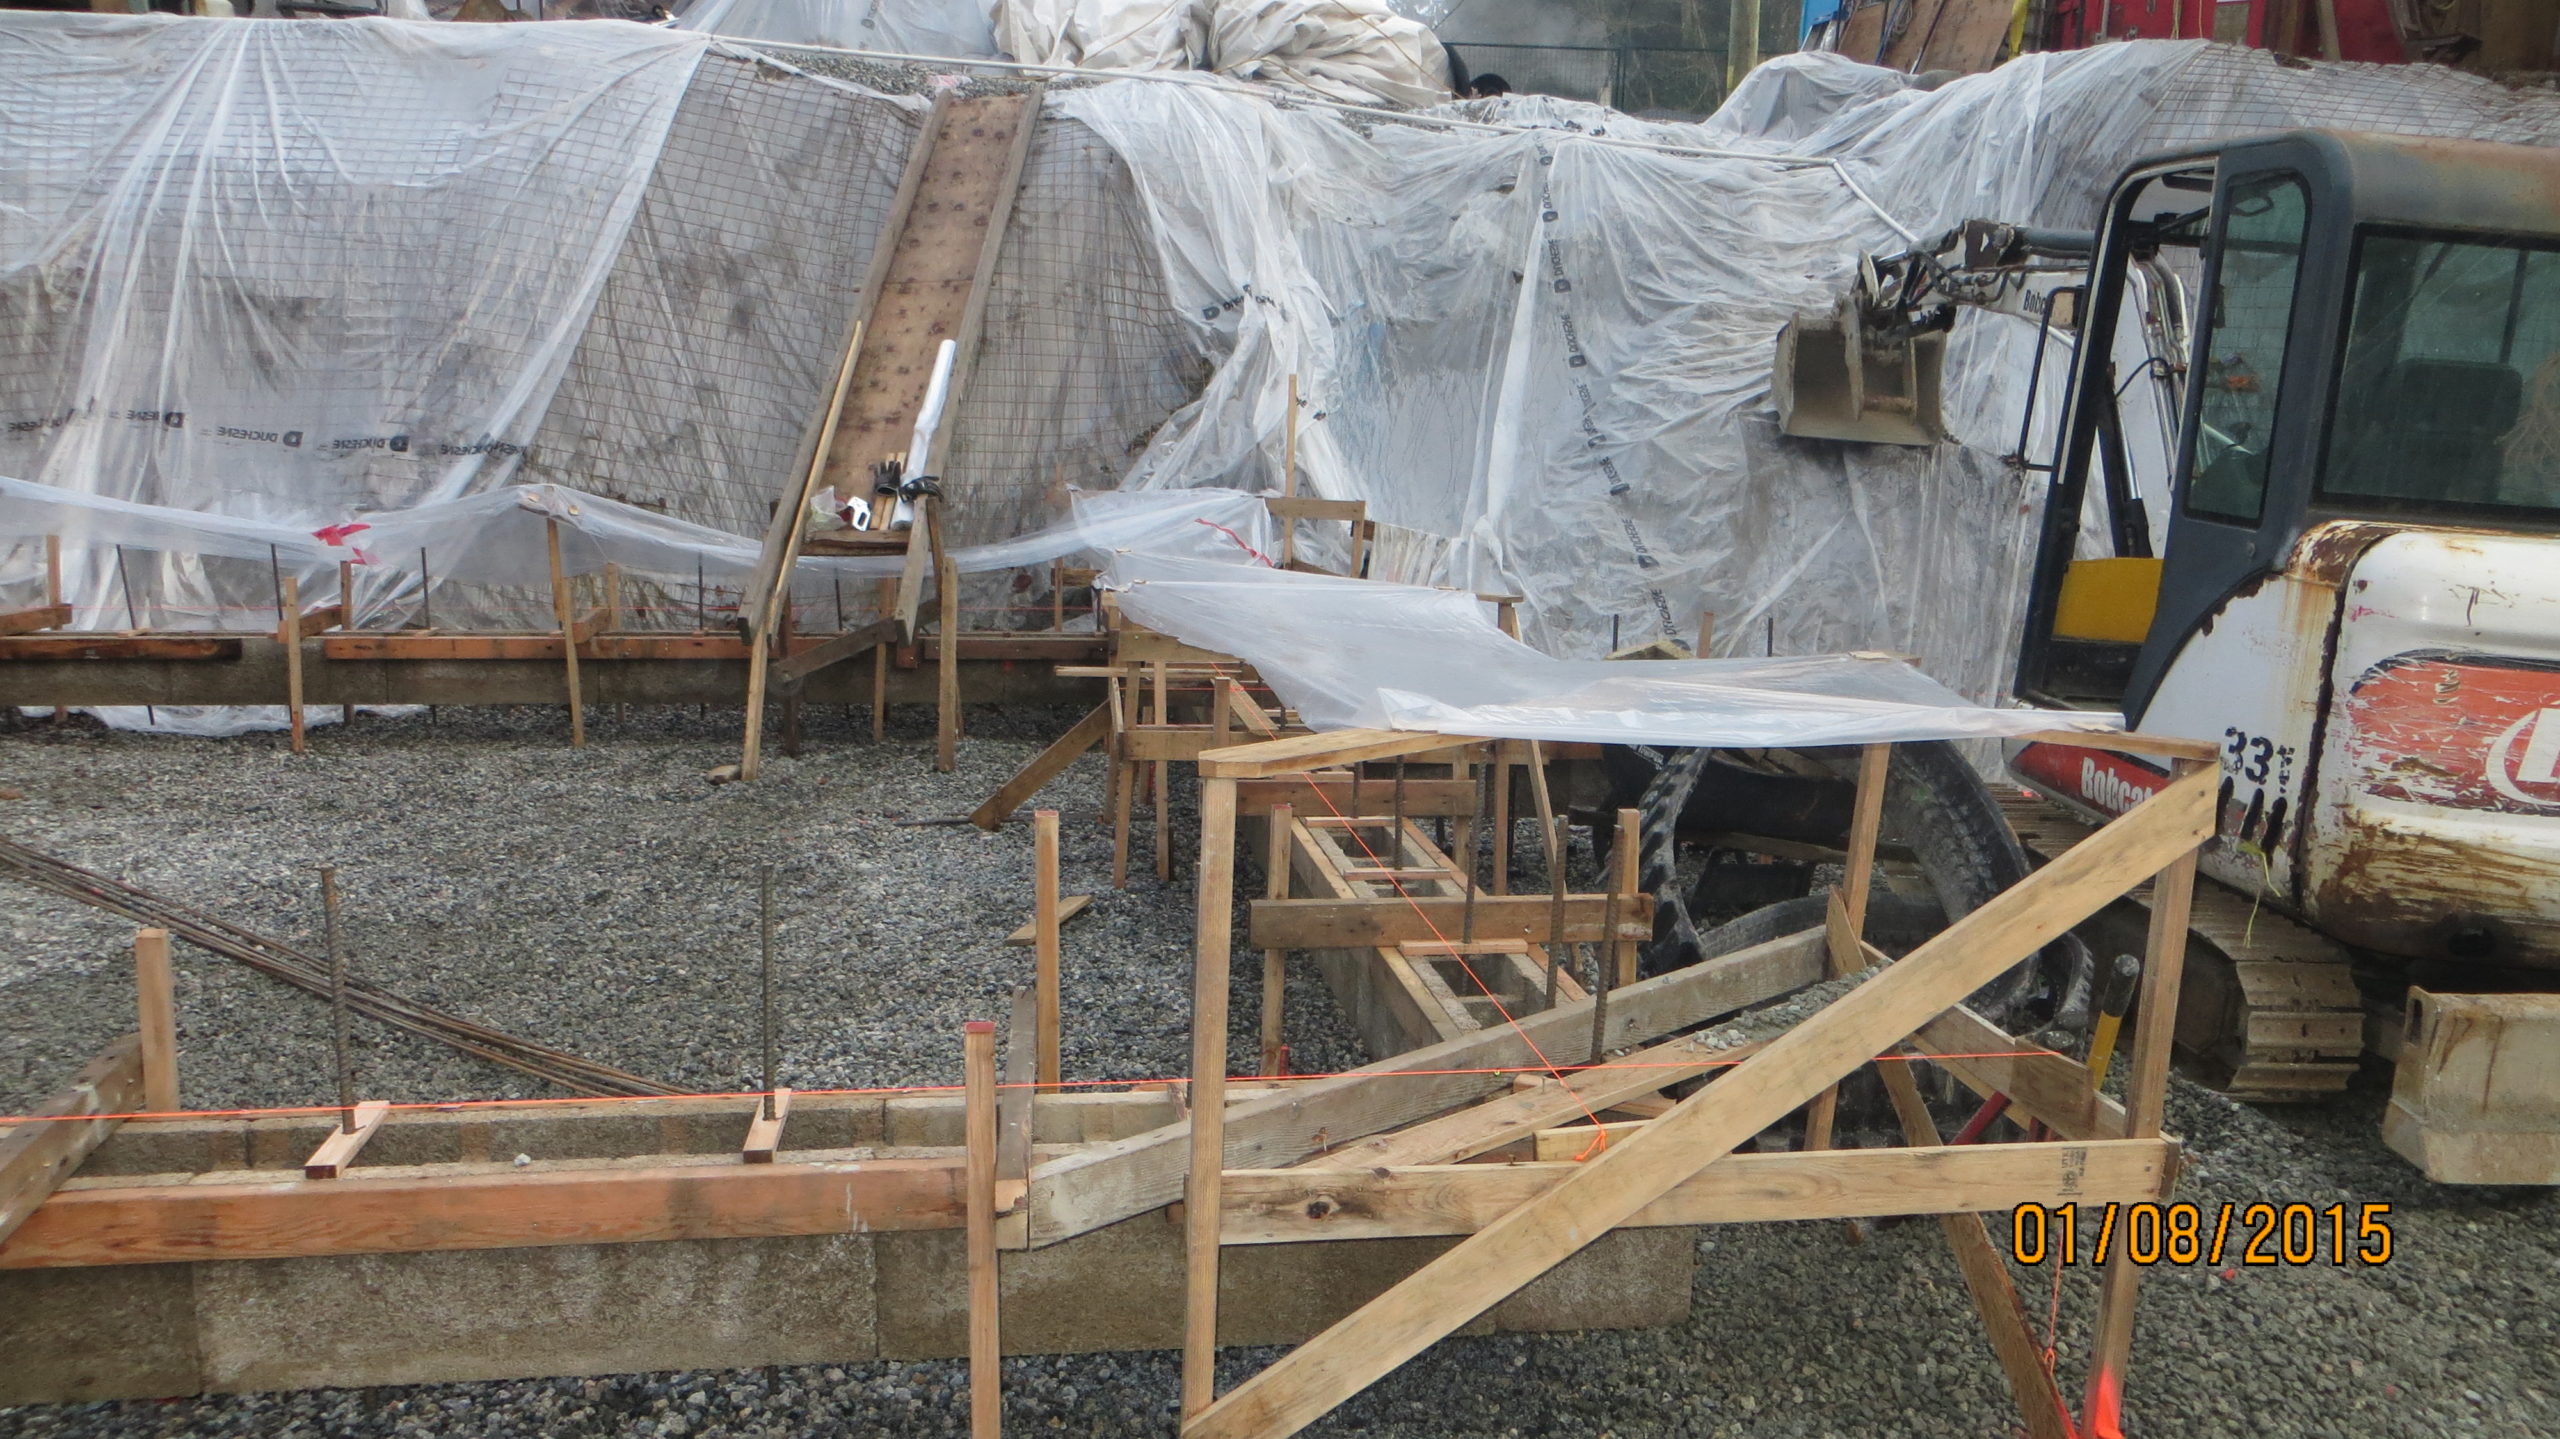 Covering footings with plastic to allow ICF blocks to dry out and then protect from rain after pour